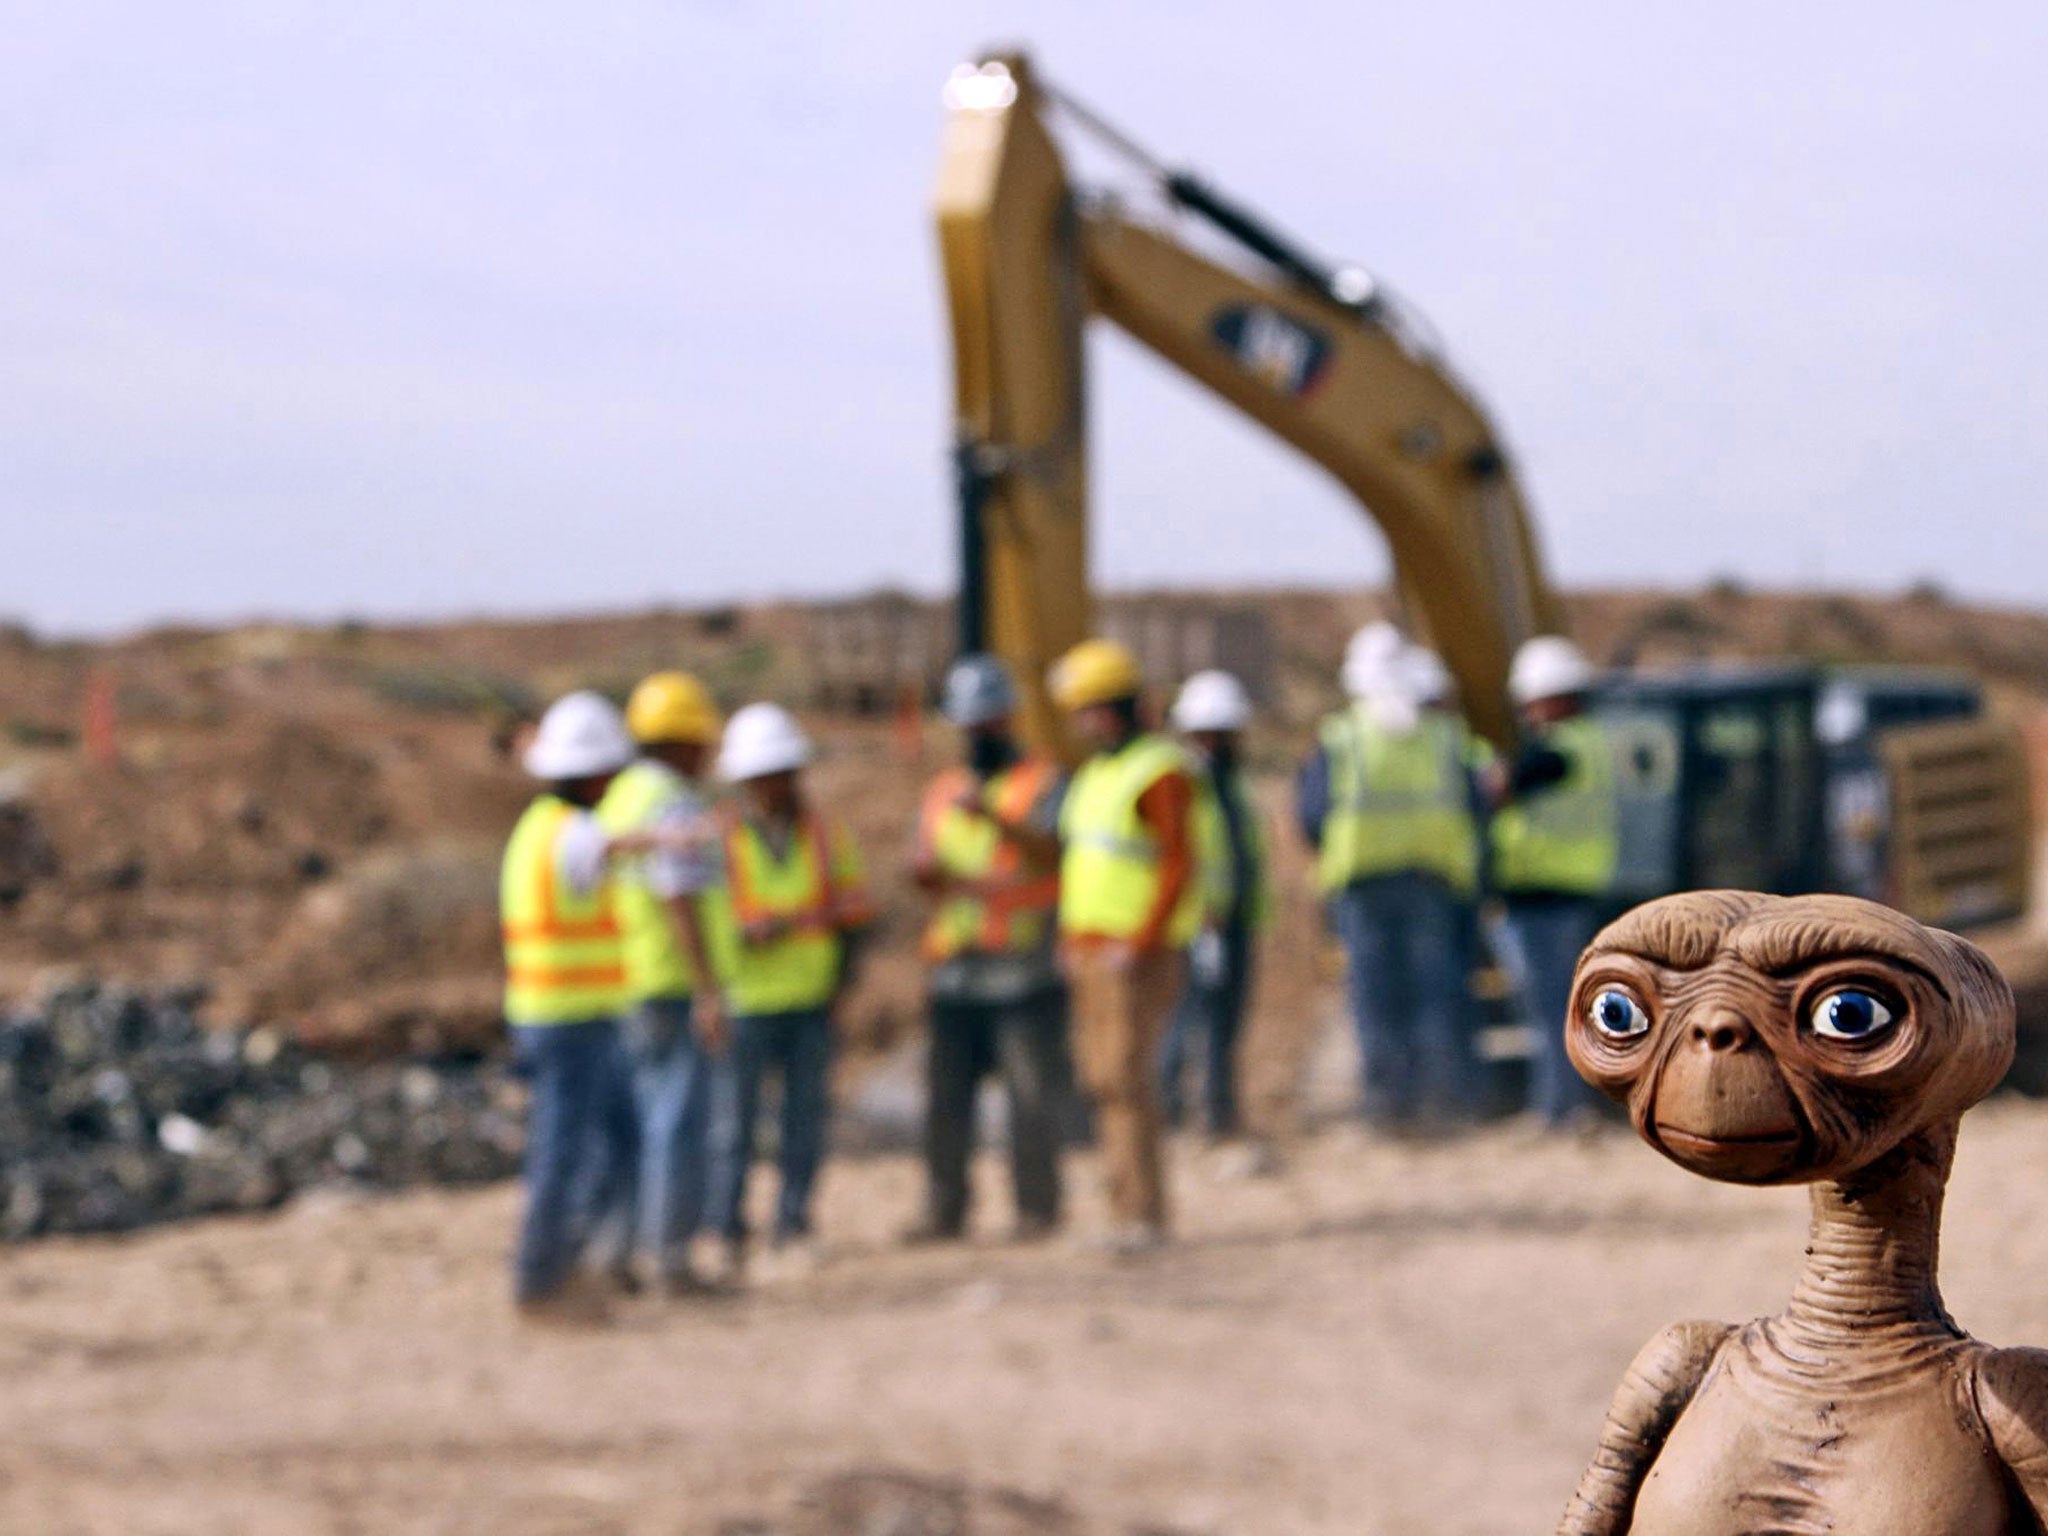 Game not over: an E.T. doll looks on as workmen uncover the dumped cartridges